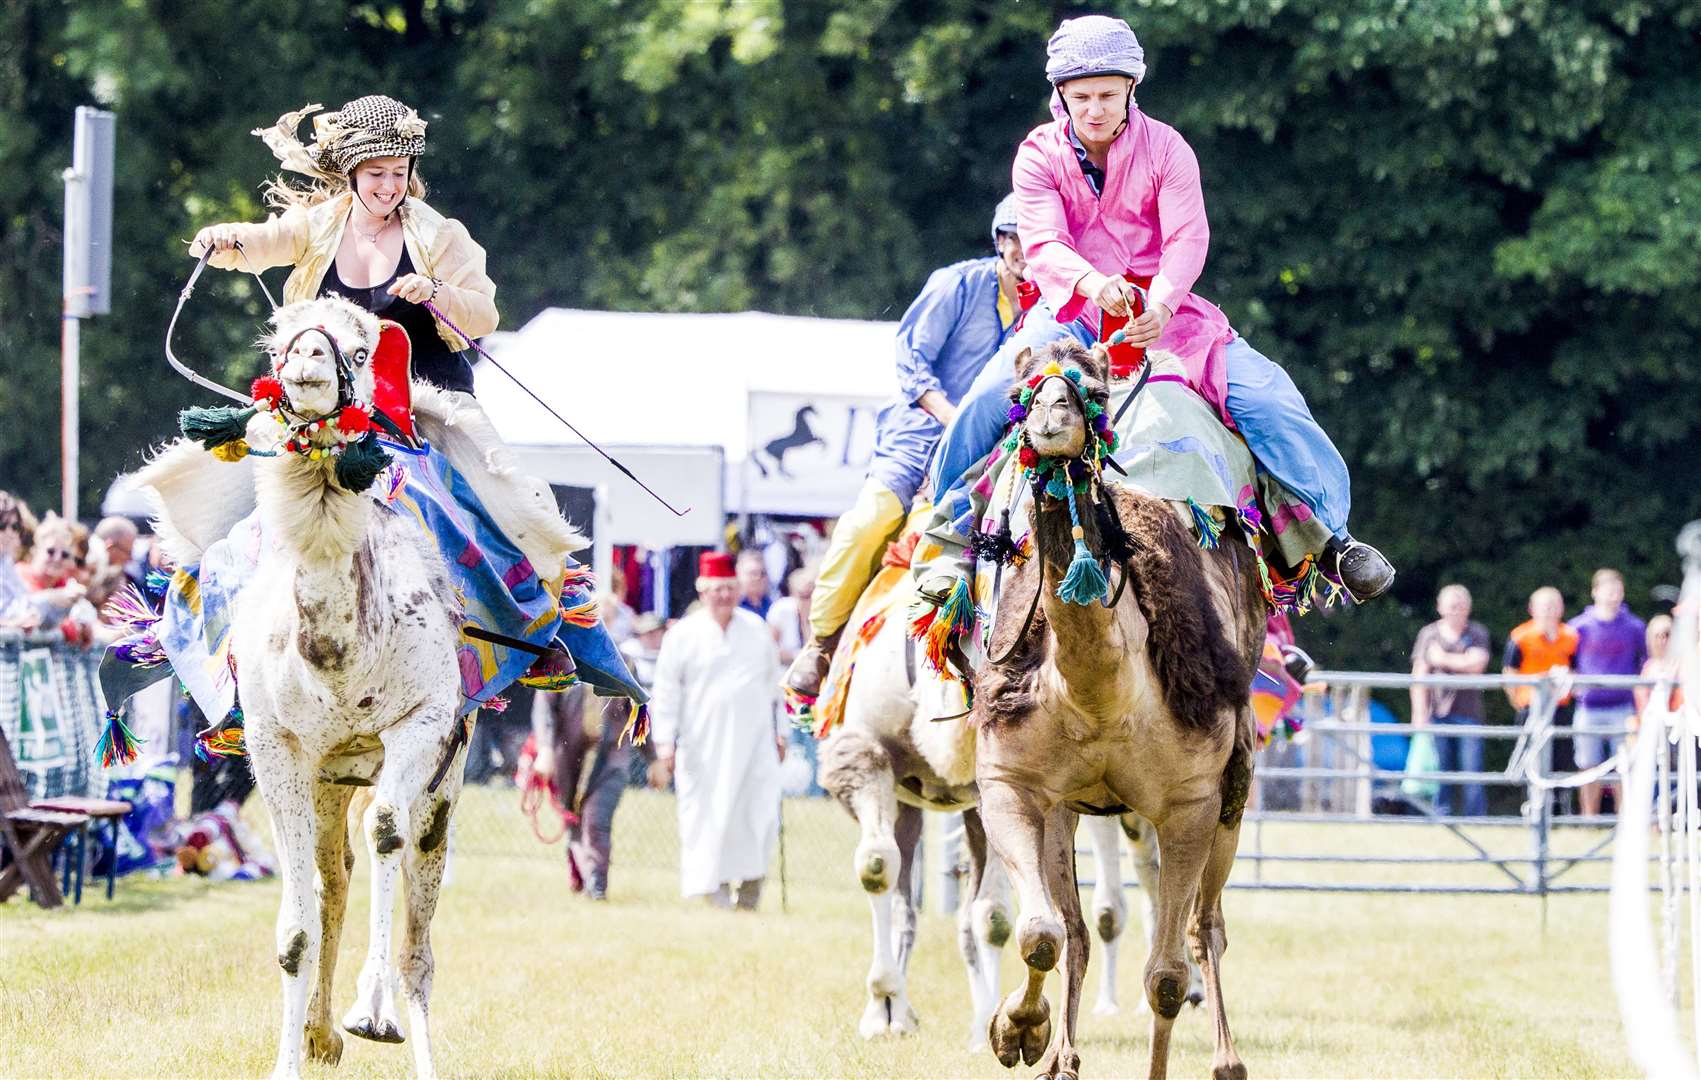 Racing camels will be at the Kent County Show